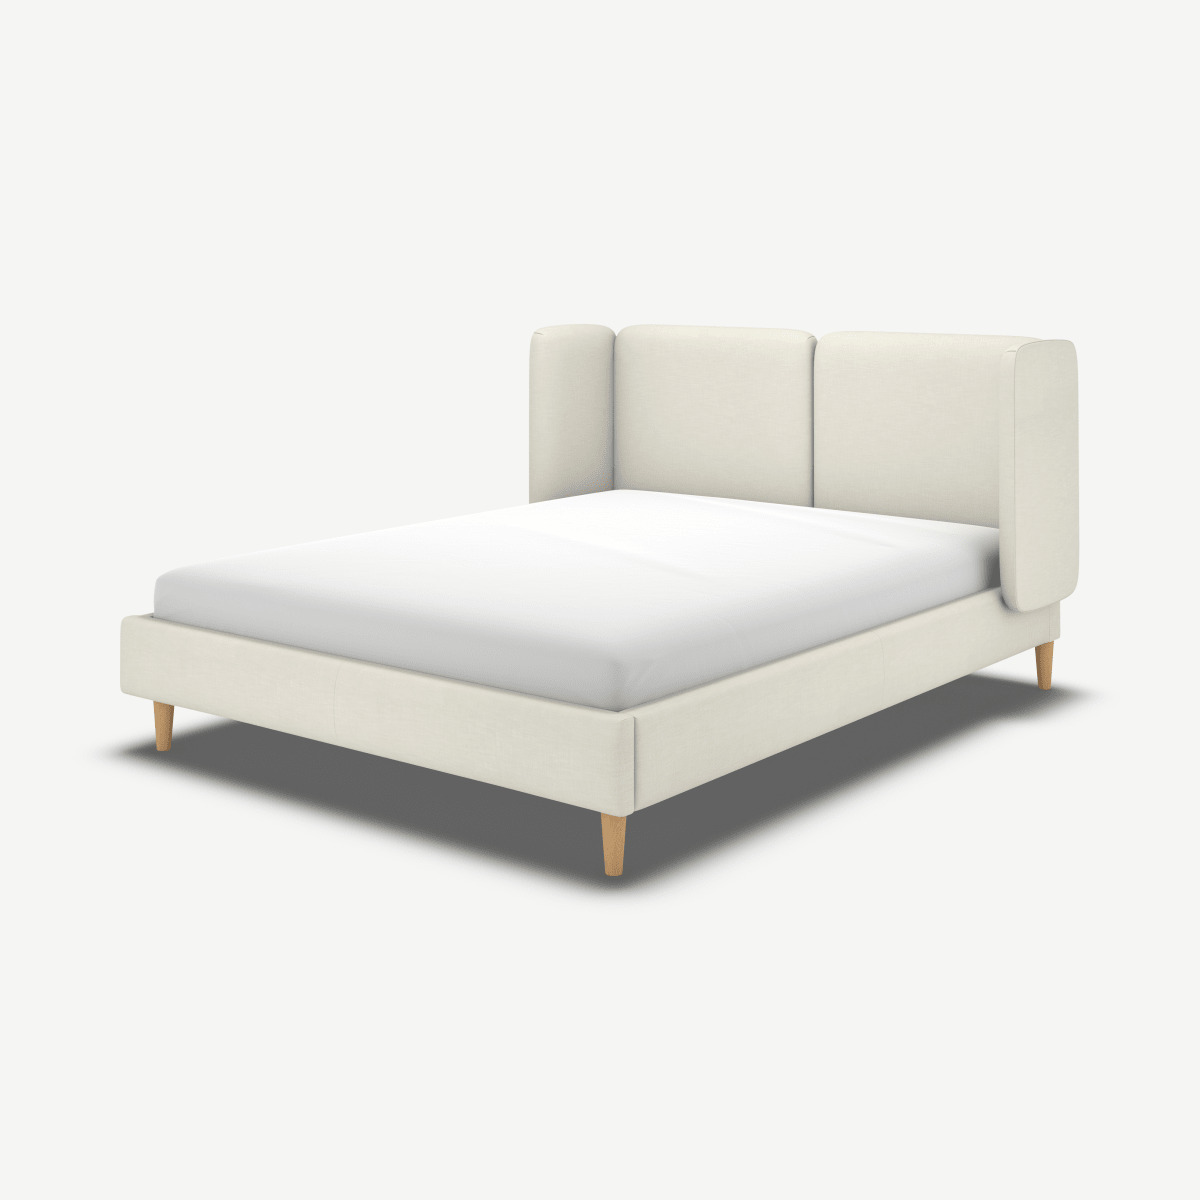 Romola King Size Bed, Putty Cotton with Oak Legs